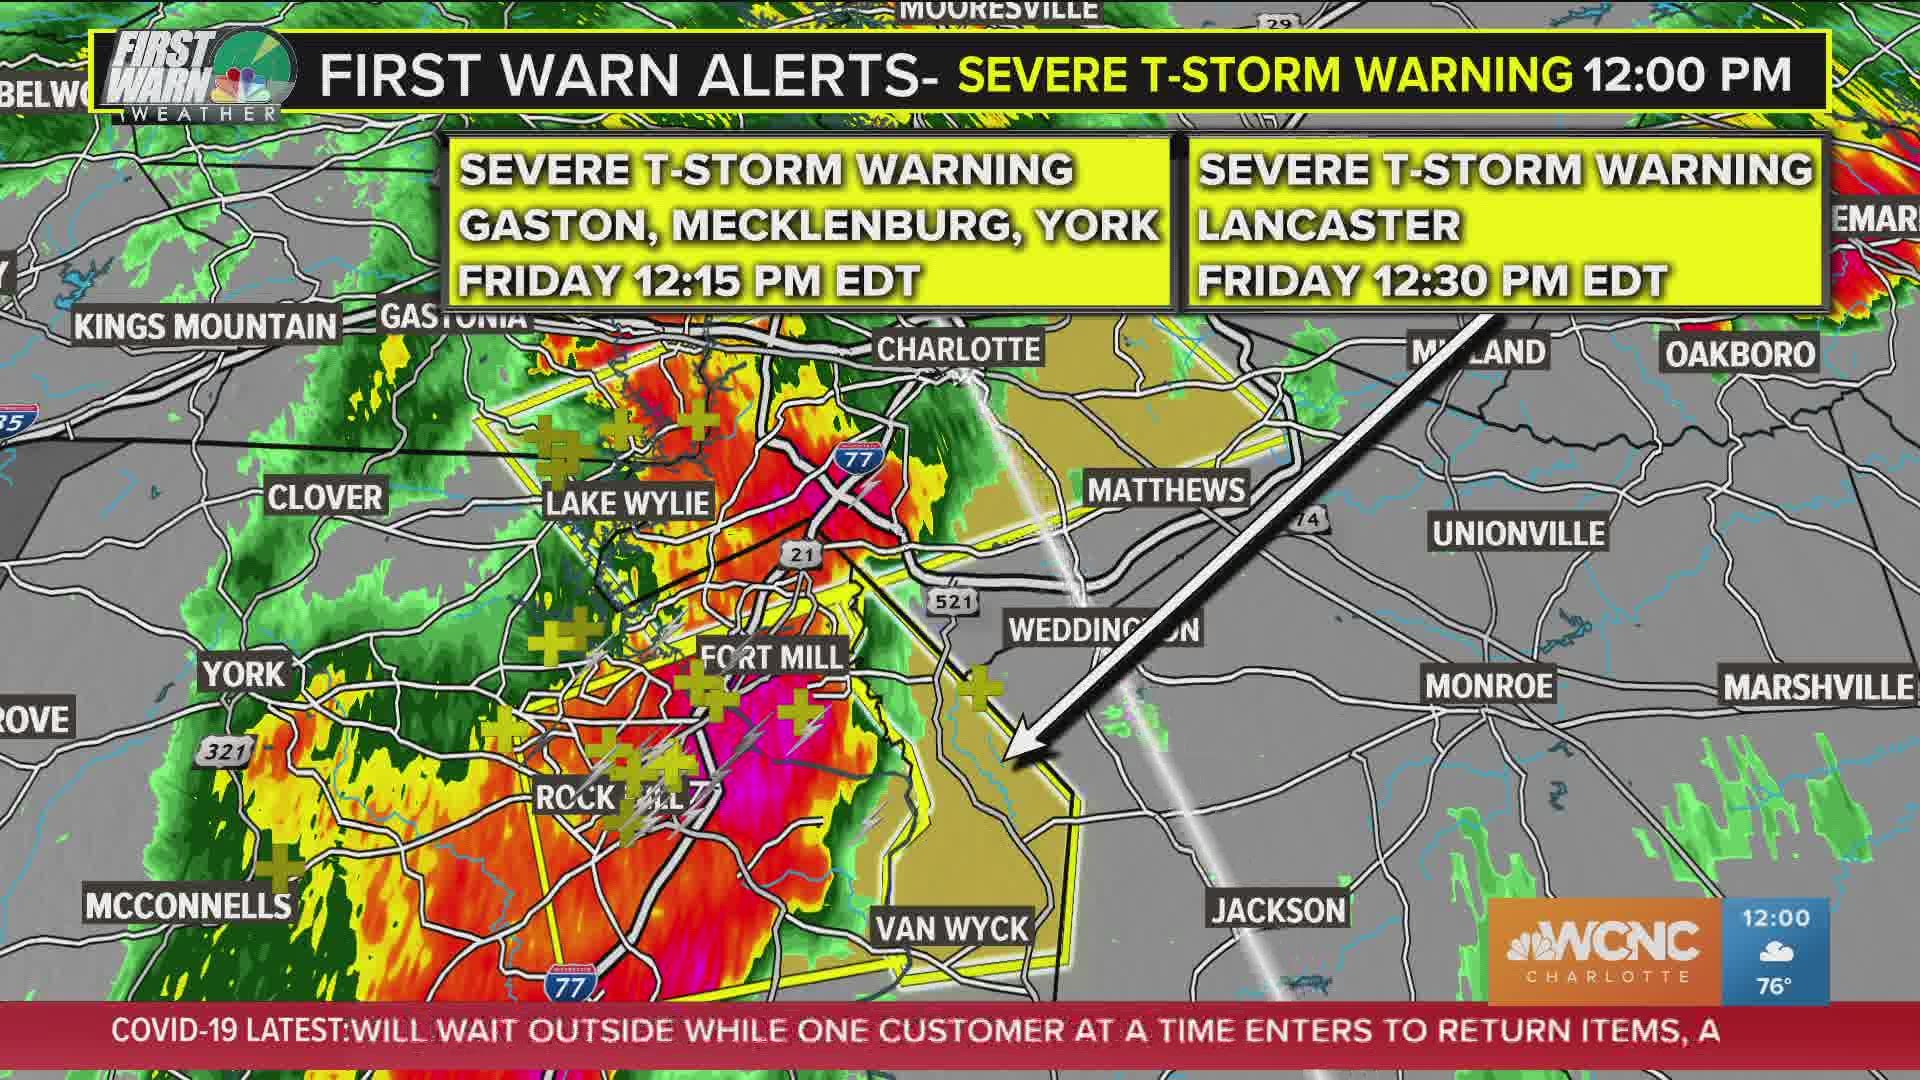 The First Warn Storm team is tracking strong storms moving through the area producing hail and damaging winds.